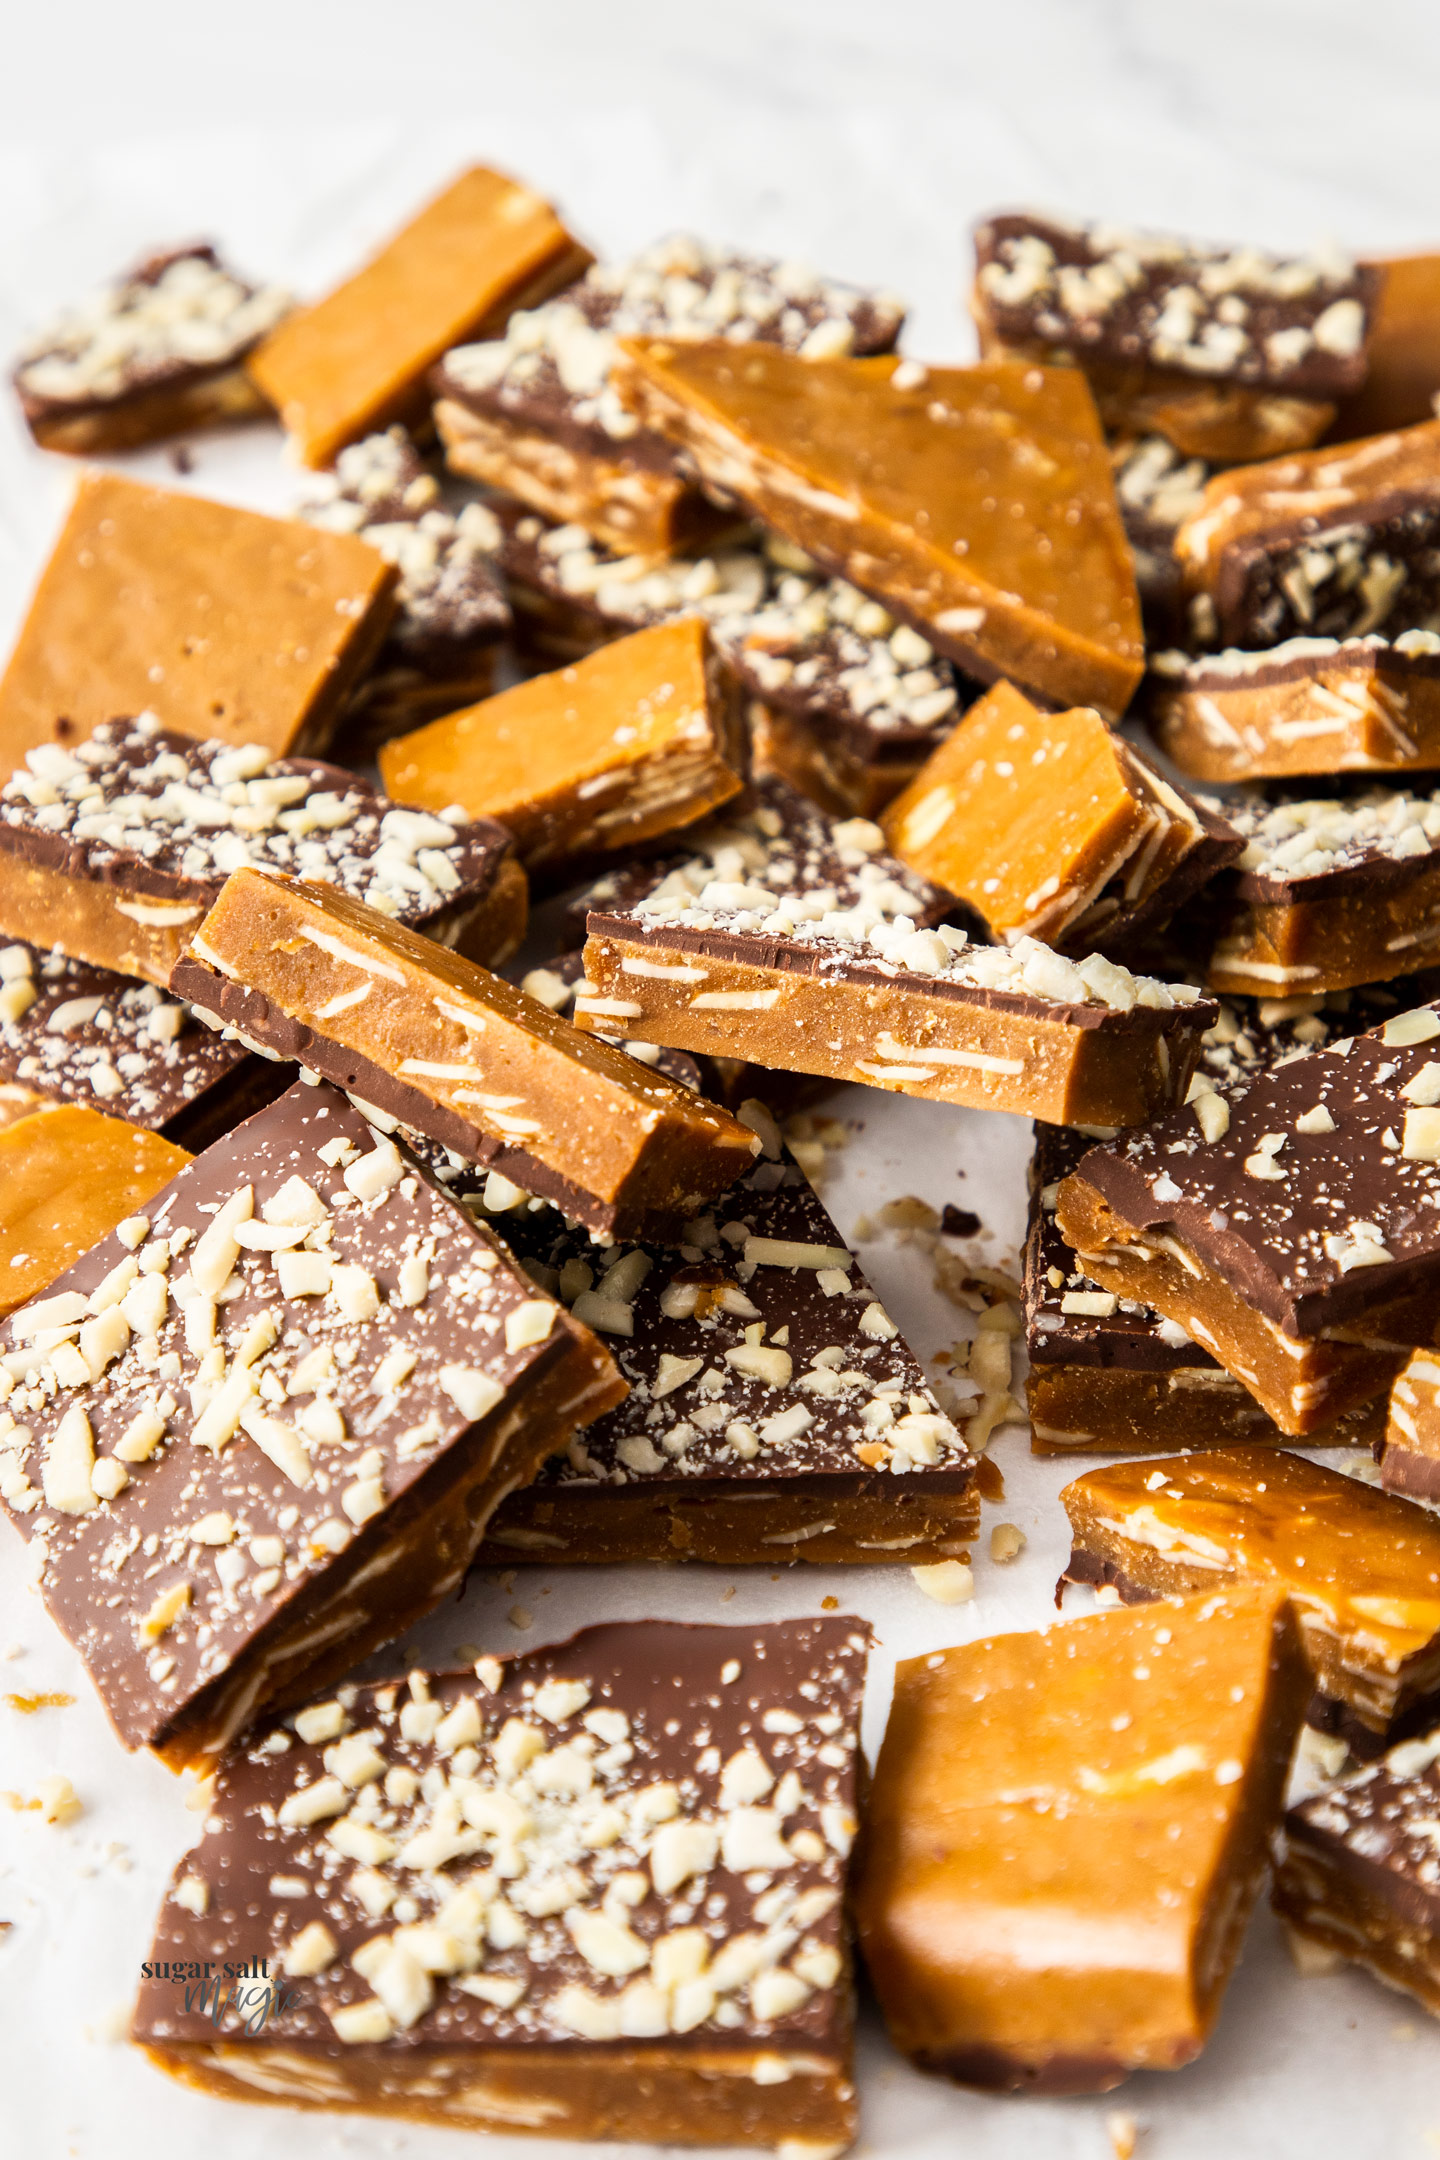 A pile of buttercrunch toffee pieces.